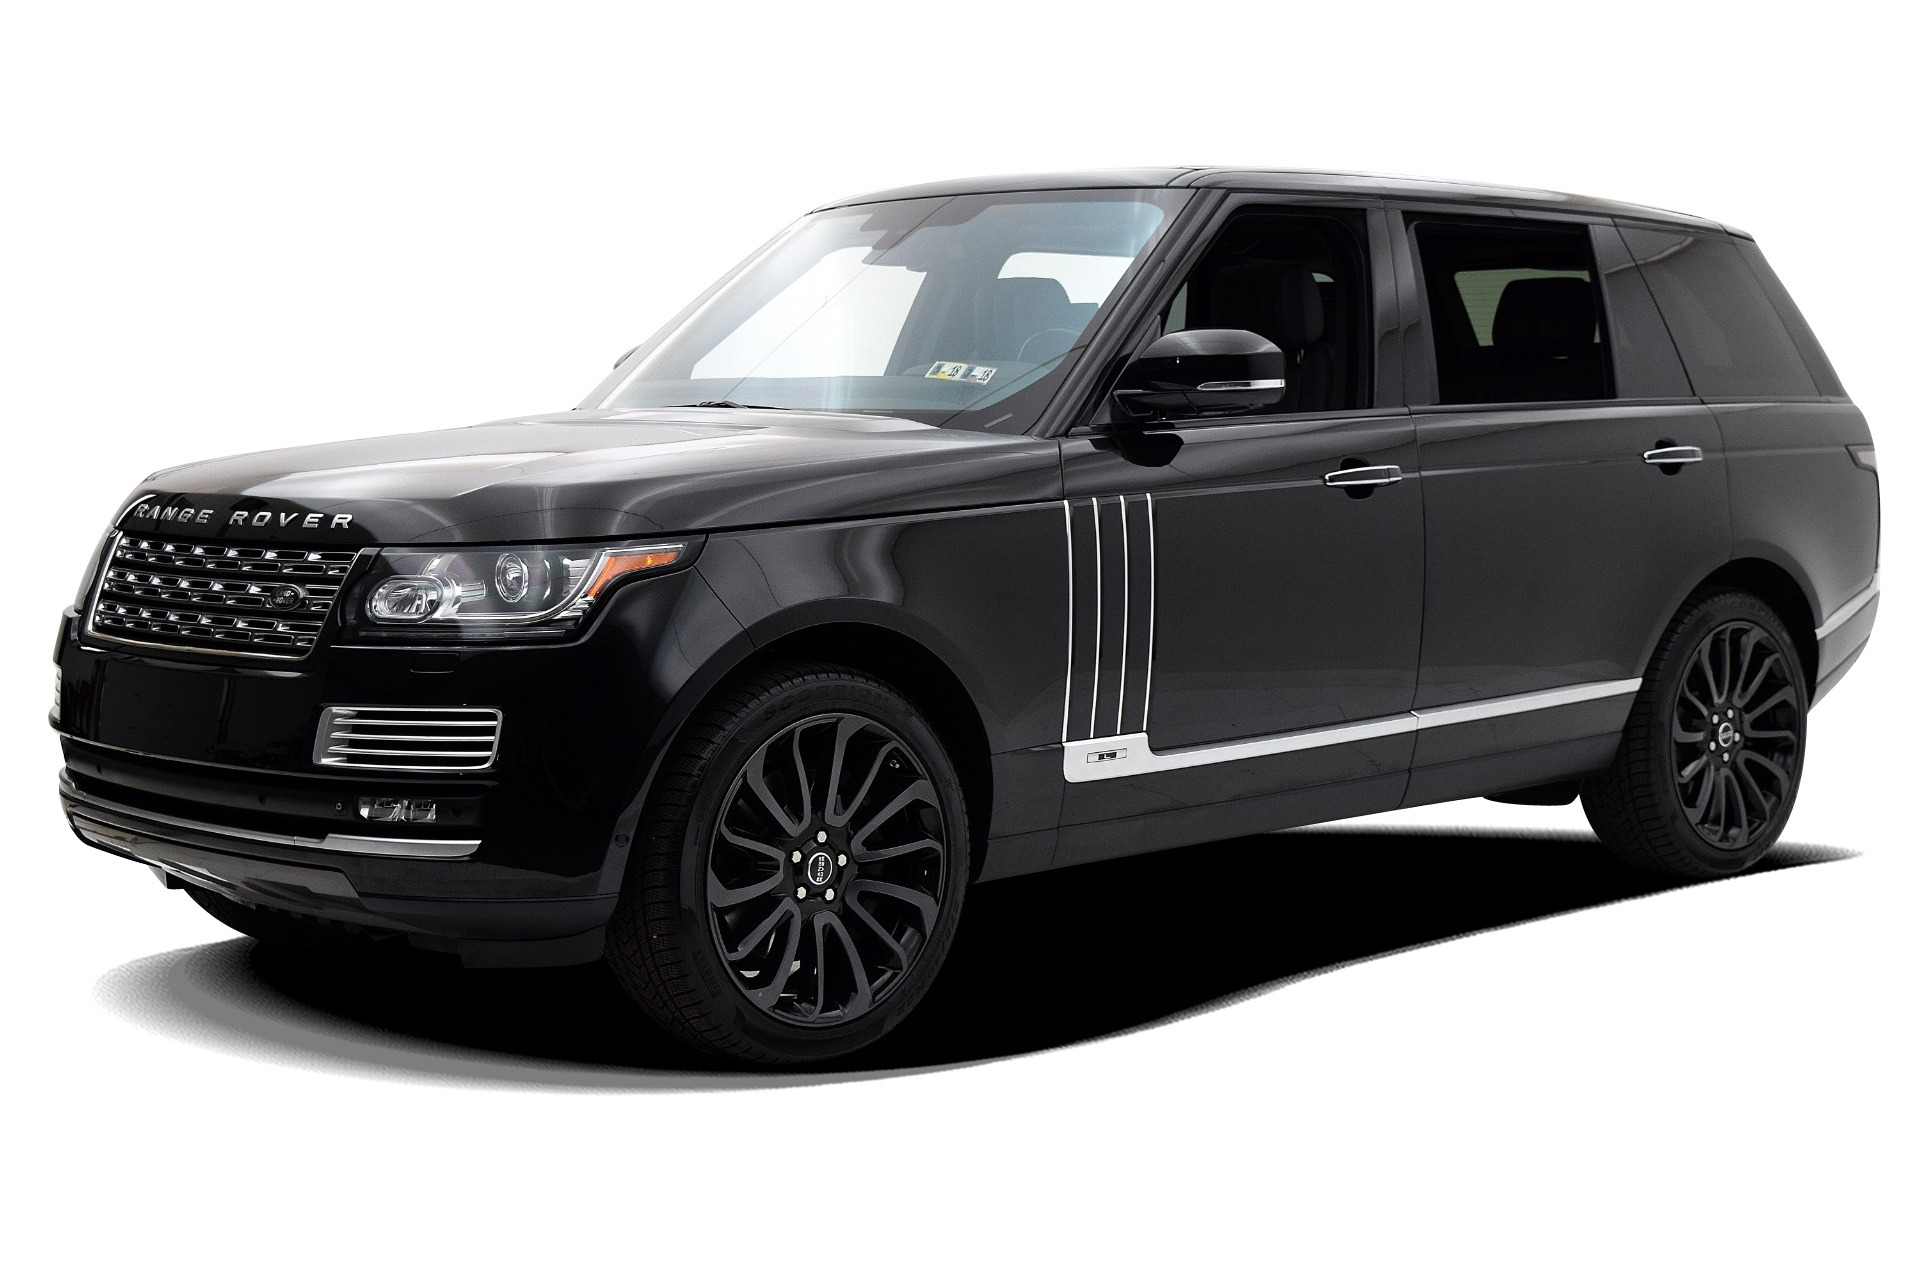 tofu sigaar scheuren Used 2015 Land Rover Range Rover Autobiography Black LWB For Sale (Sold) |  FC Kerbeck Stock #17BE106AEB